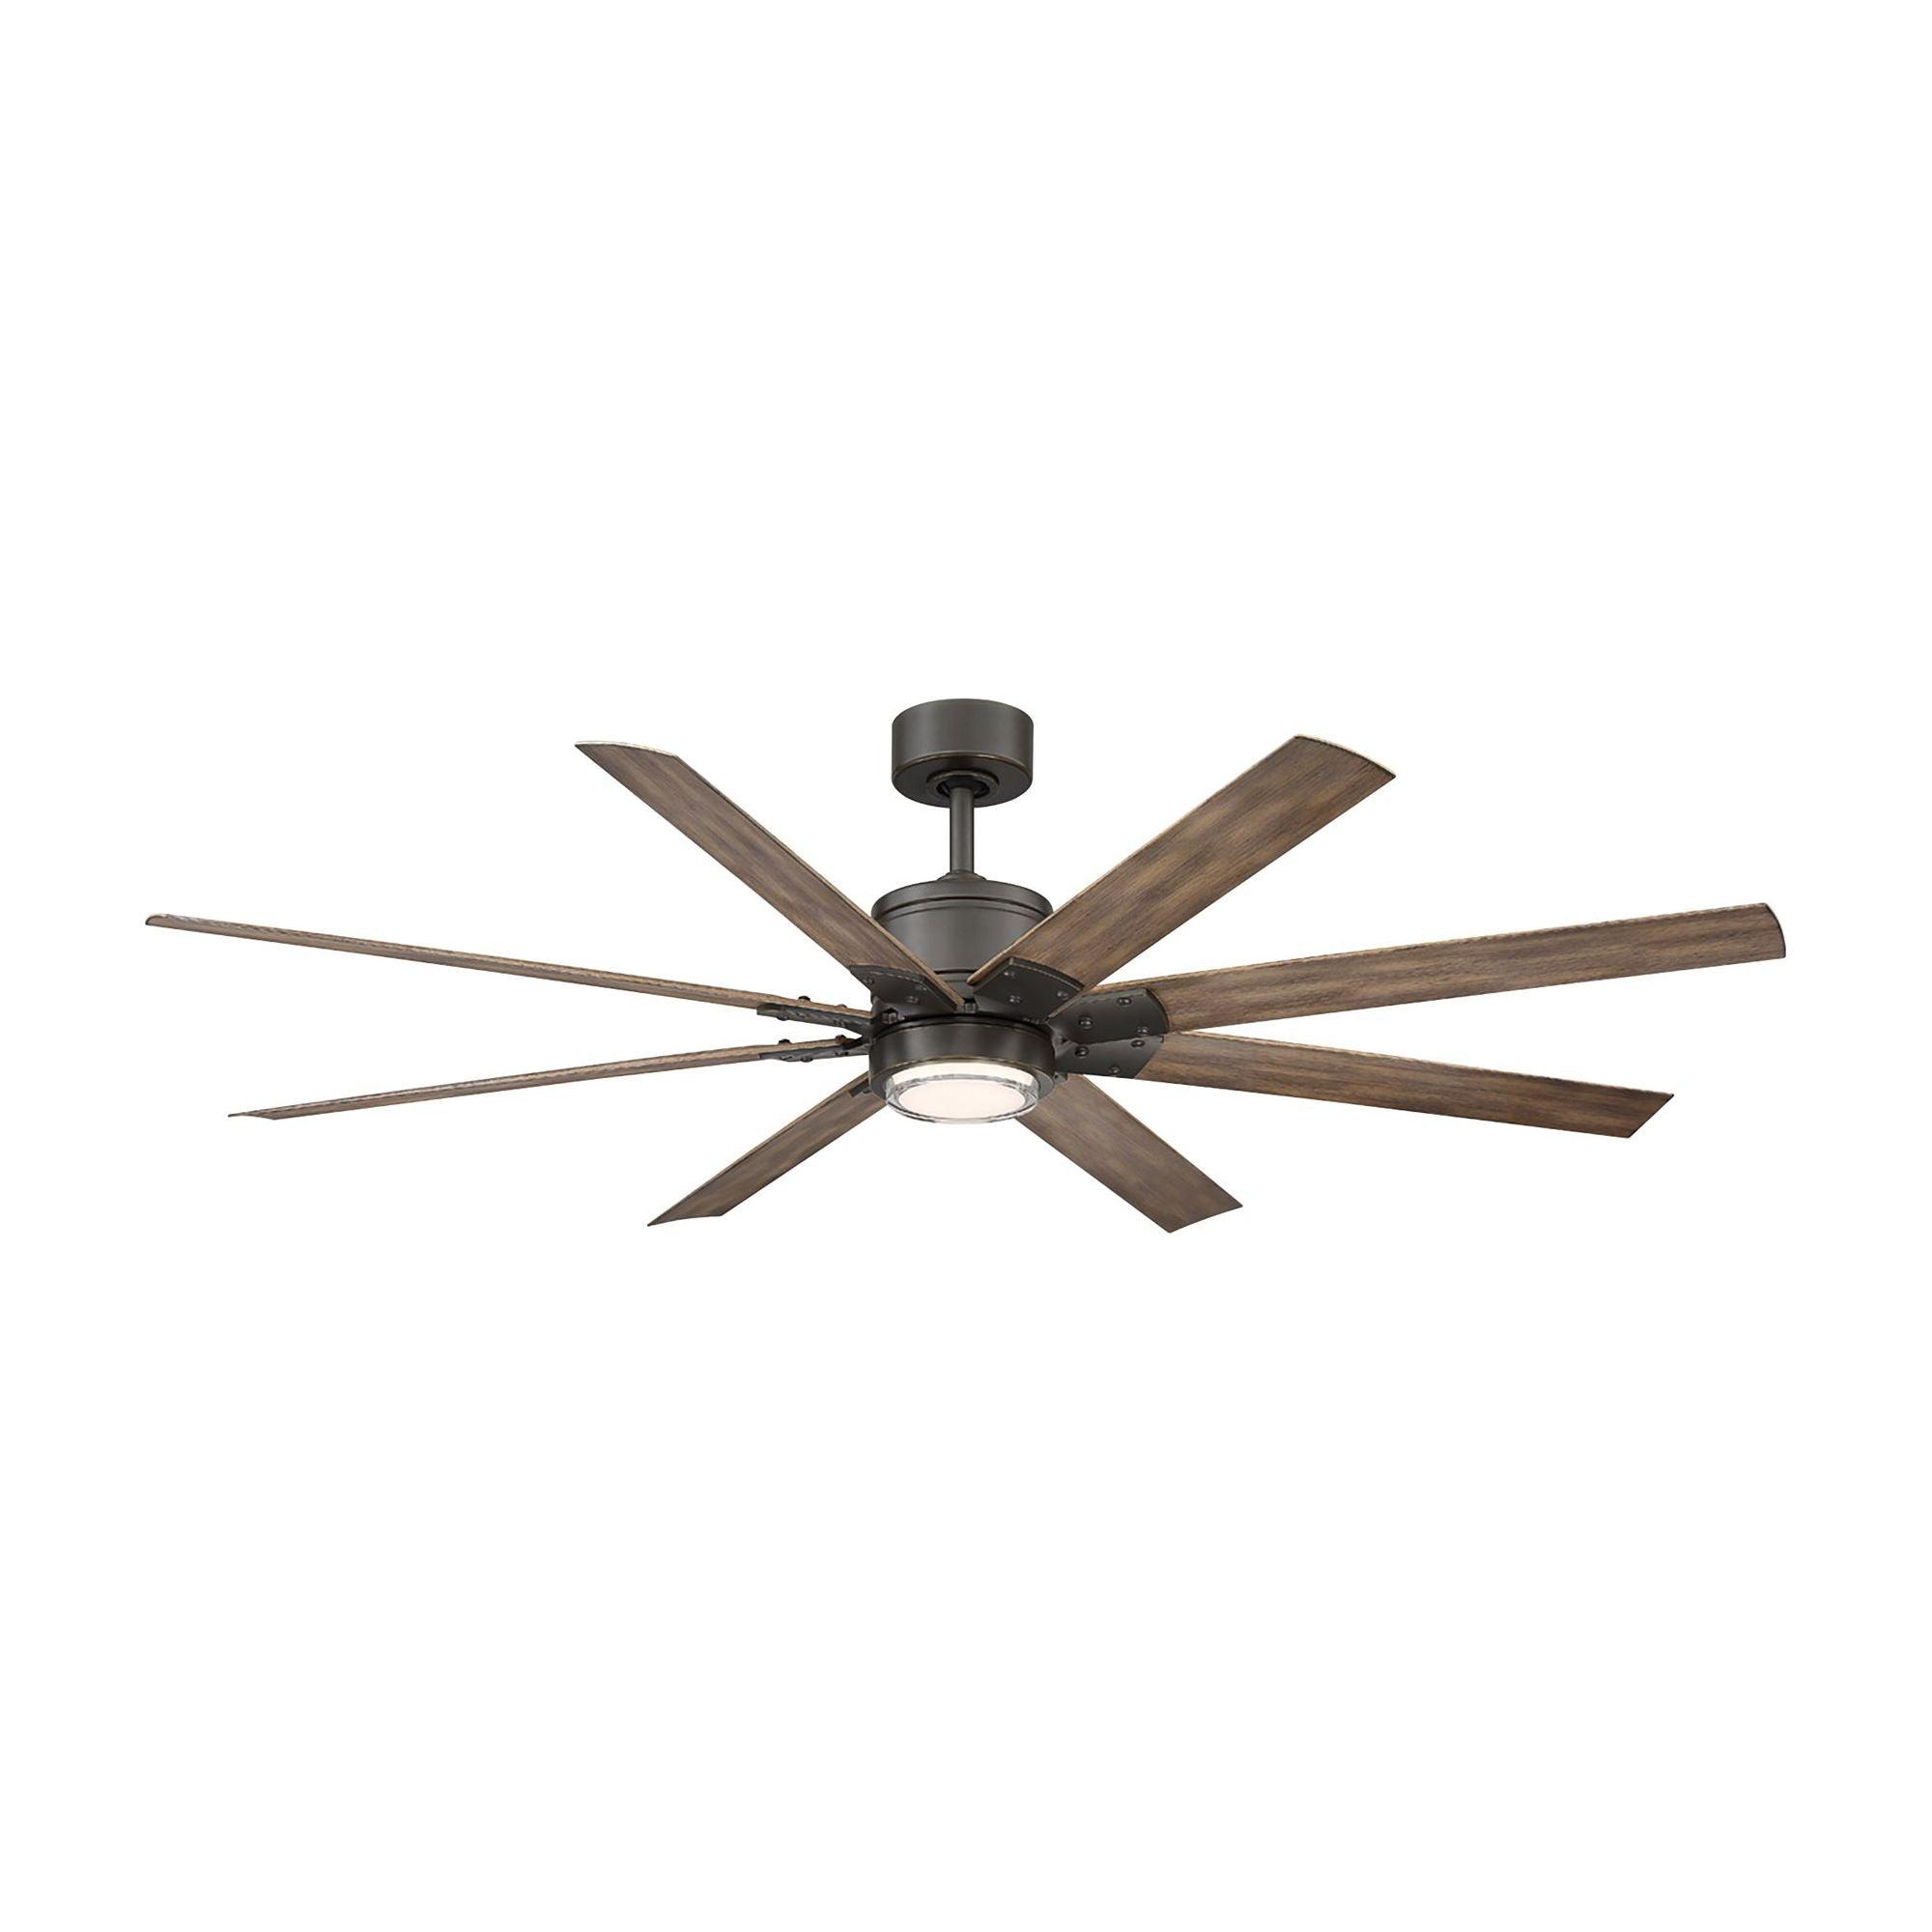 Modern Forms - Renegade Indoor/Outdoor 8-Blade 52" Smart Ceiling Fan with LED Light Kit and Remote Control - Lights Canada